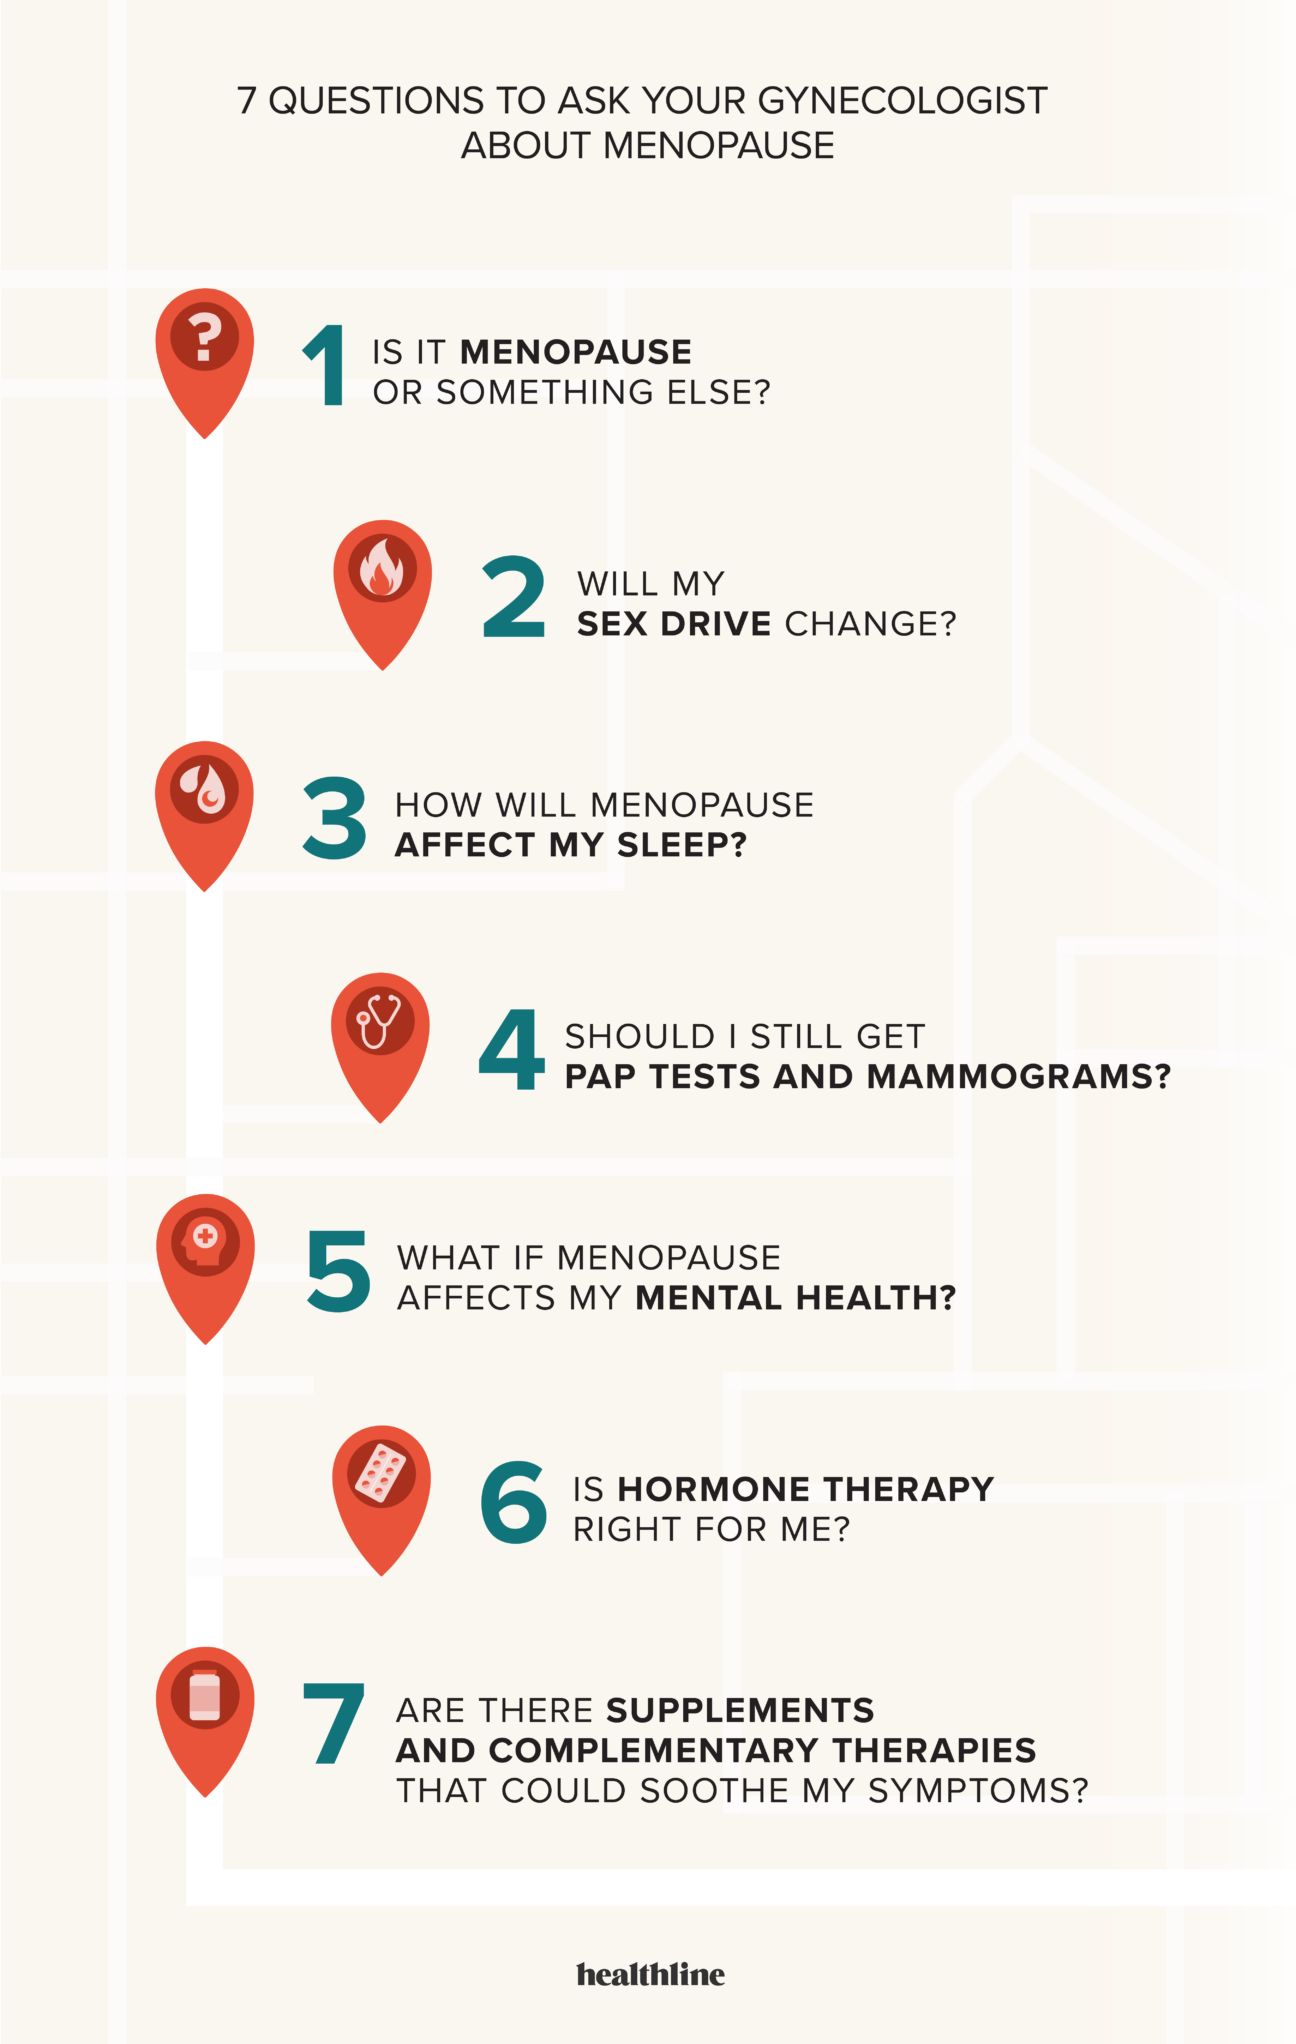 infographic with questions to ask gynecologist during menopause